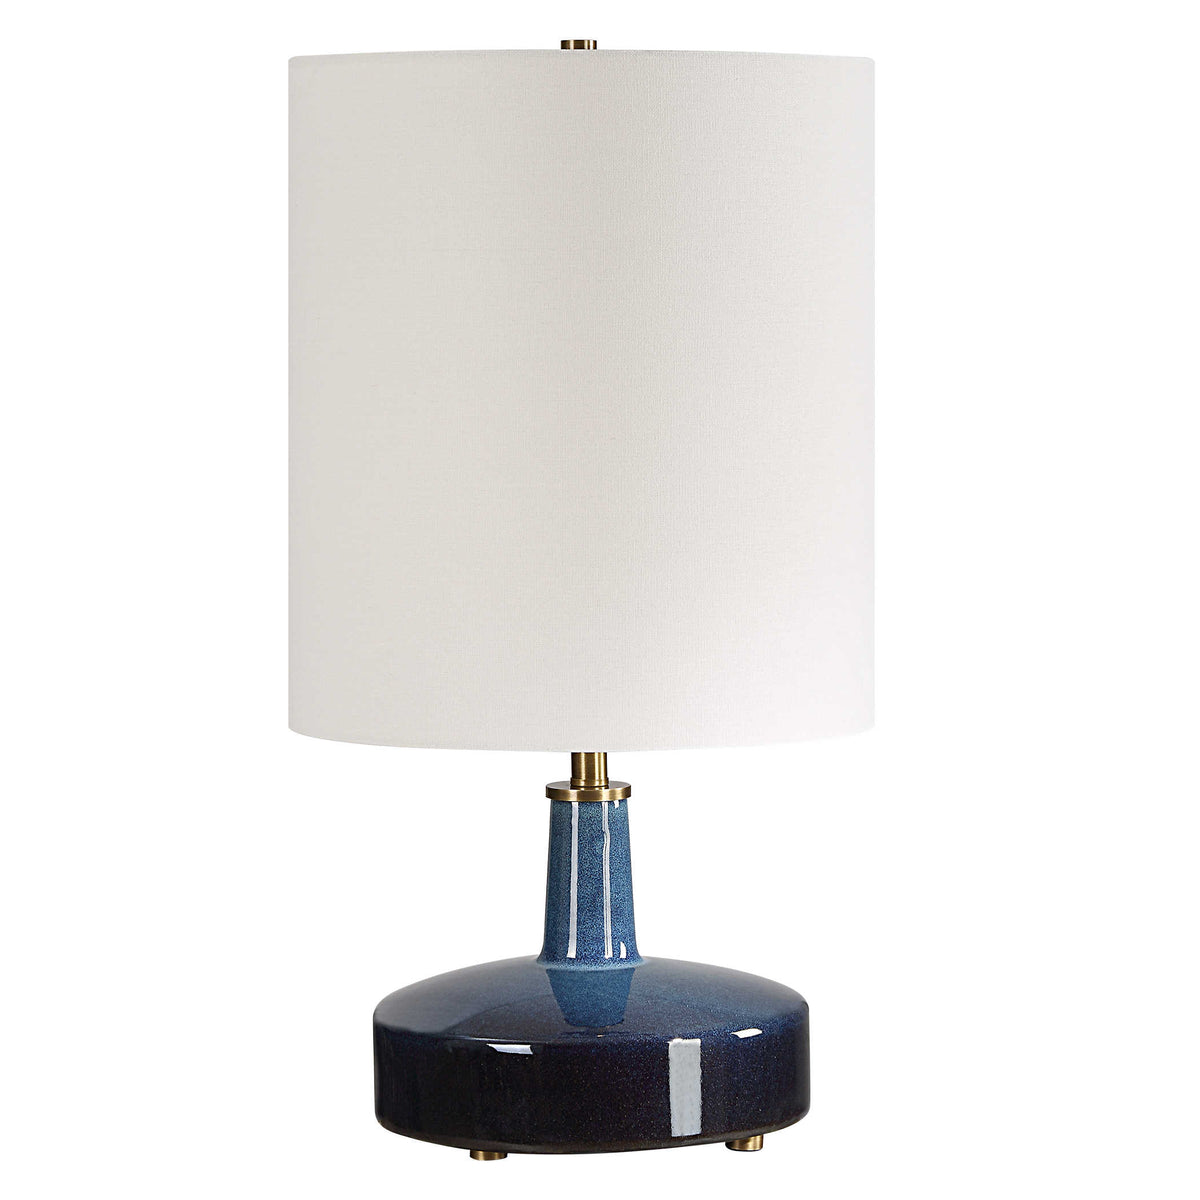 Uttermost - 30364-1 - One Light Table Lamp - Abyss - While Brass